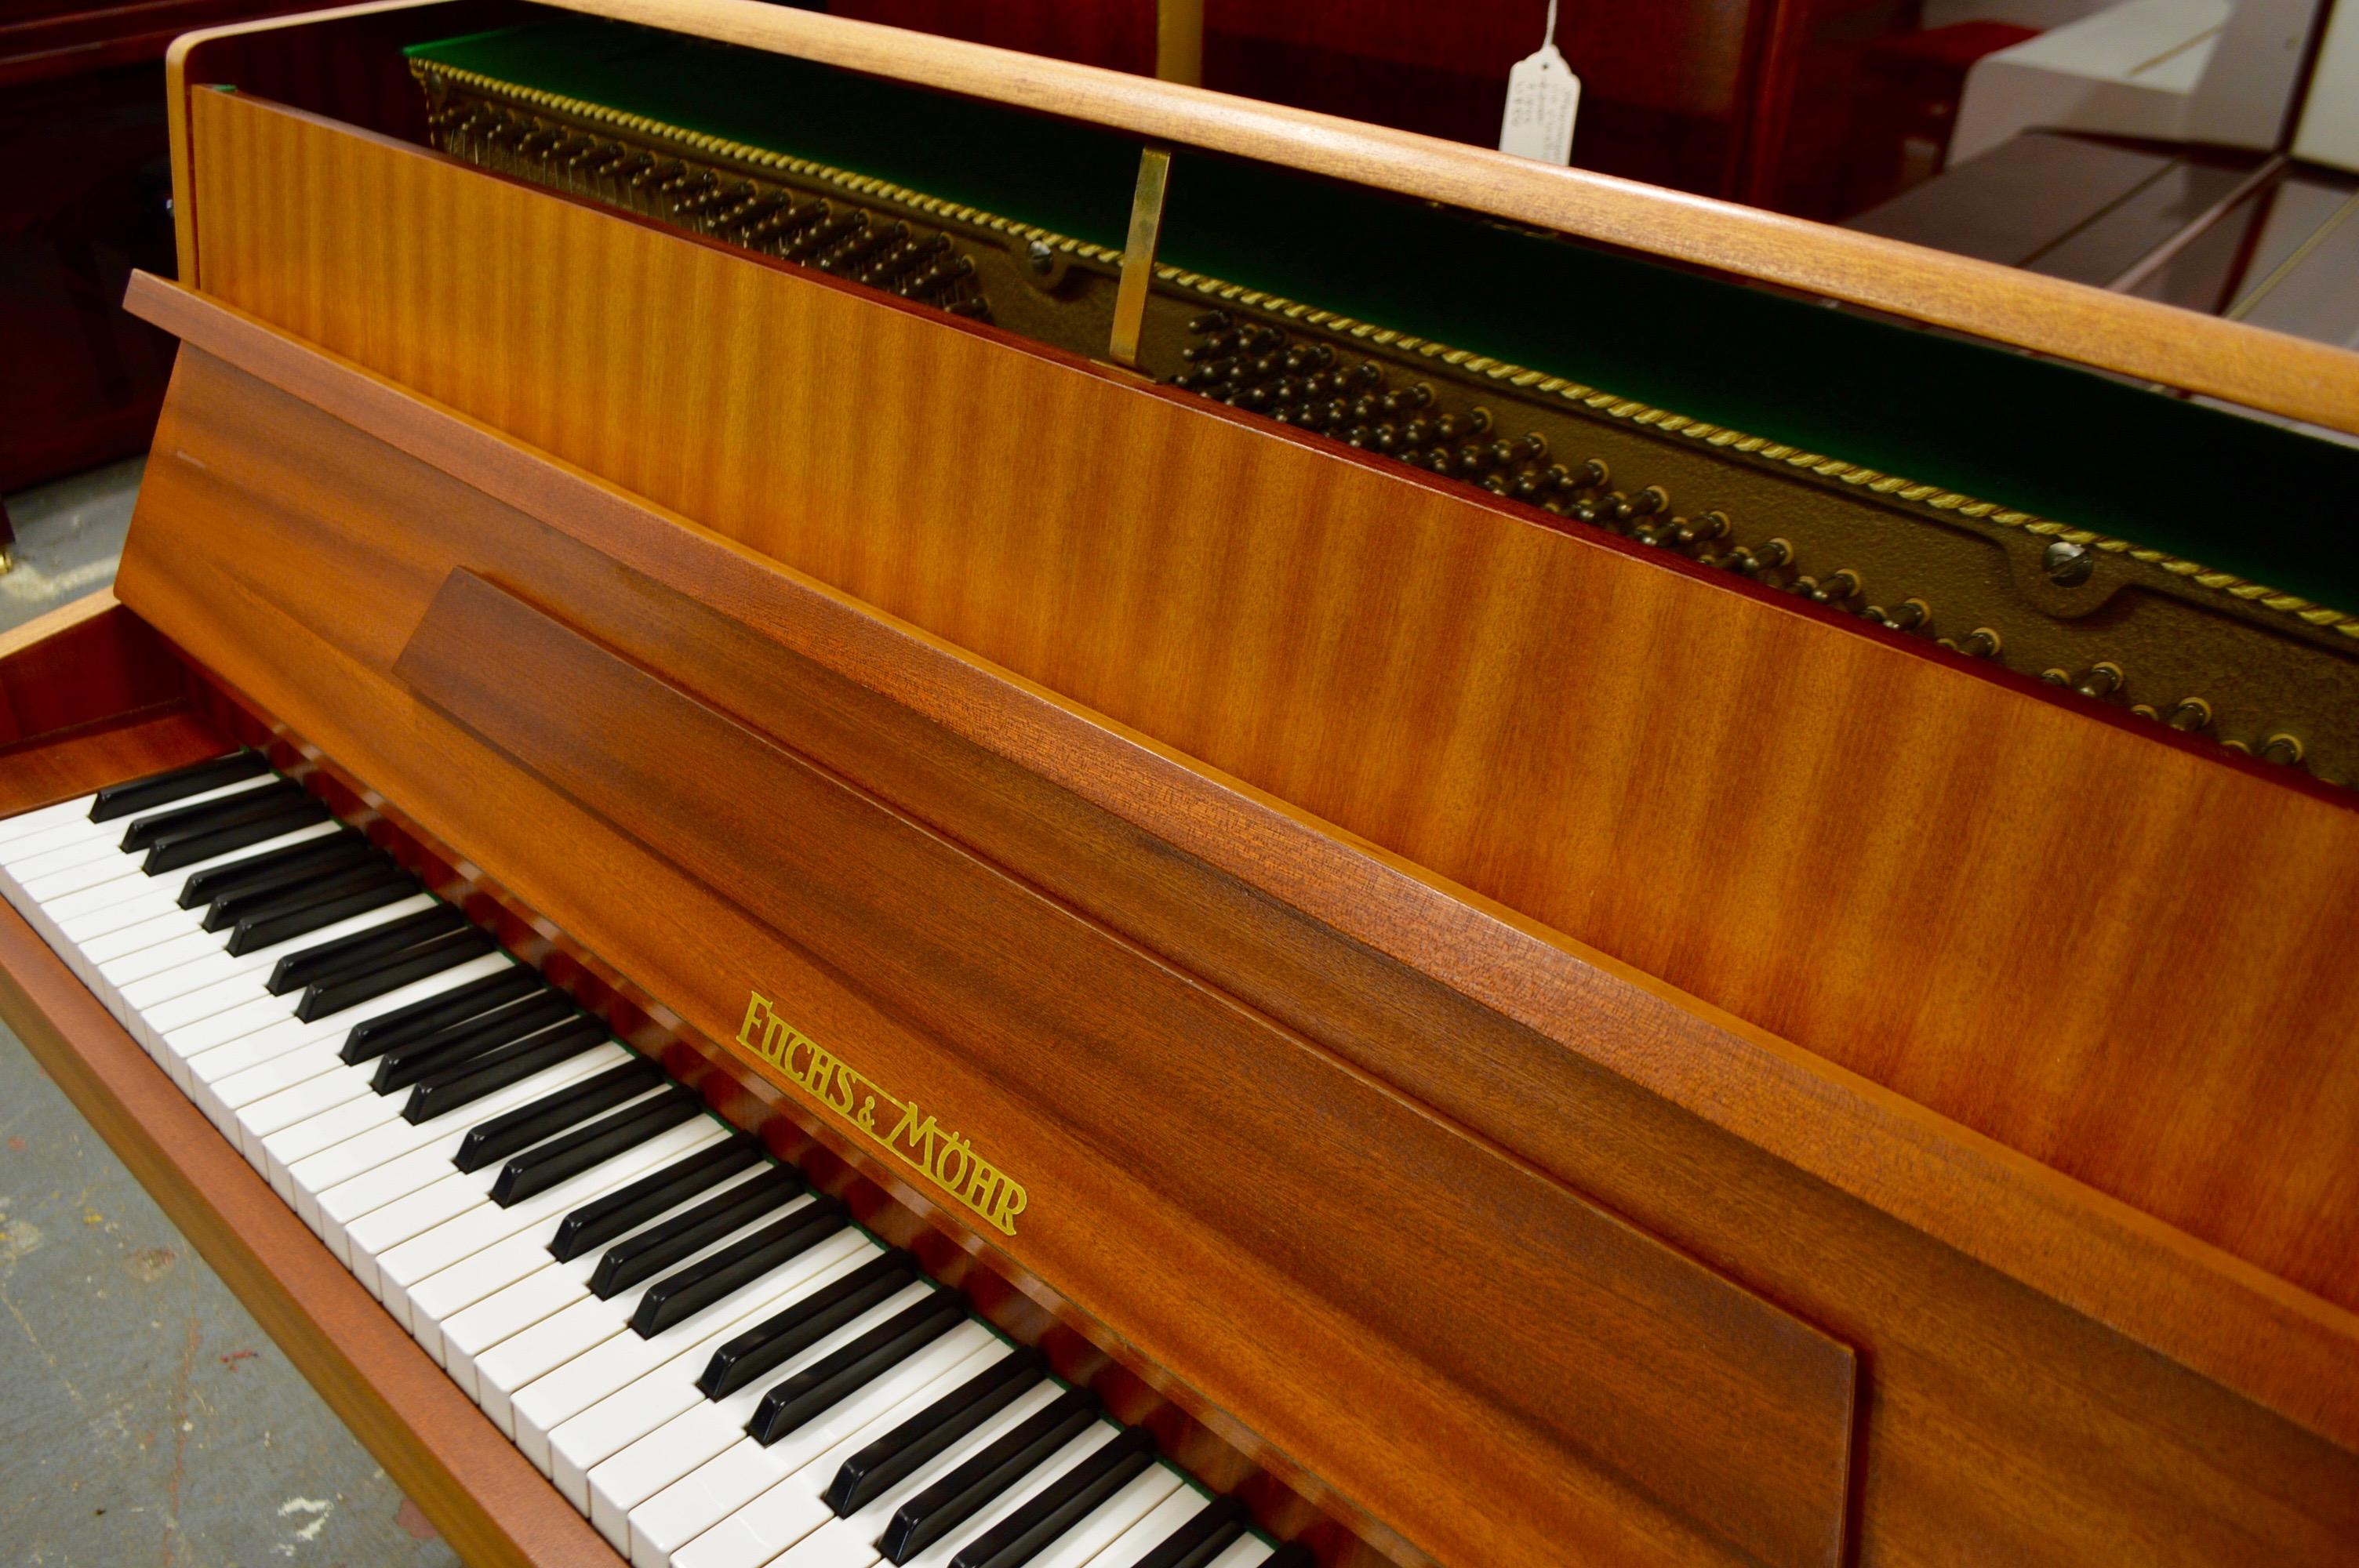 Fuchs & Mohr German Made Mid Centruy Piano in Mahogany In Good Condition For Sale In Macclesfield, Cheshire